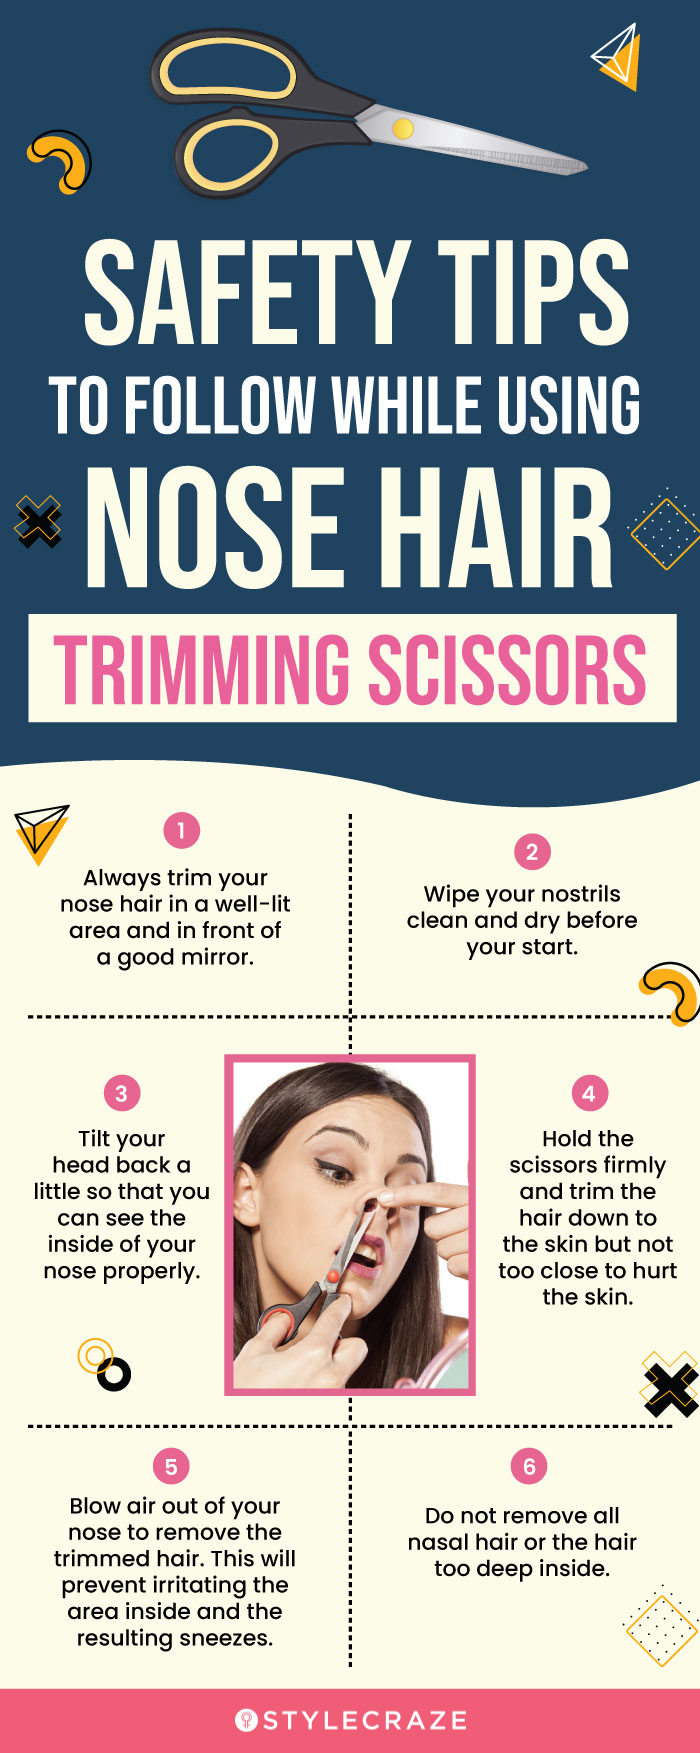 Safety Tips To Follow While Using Nose Hair Trimming Scissors (infographic)